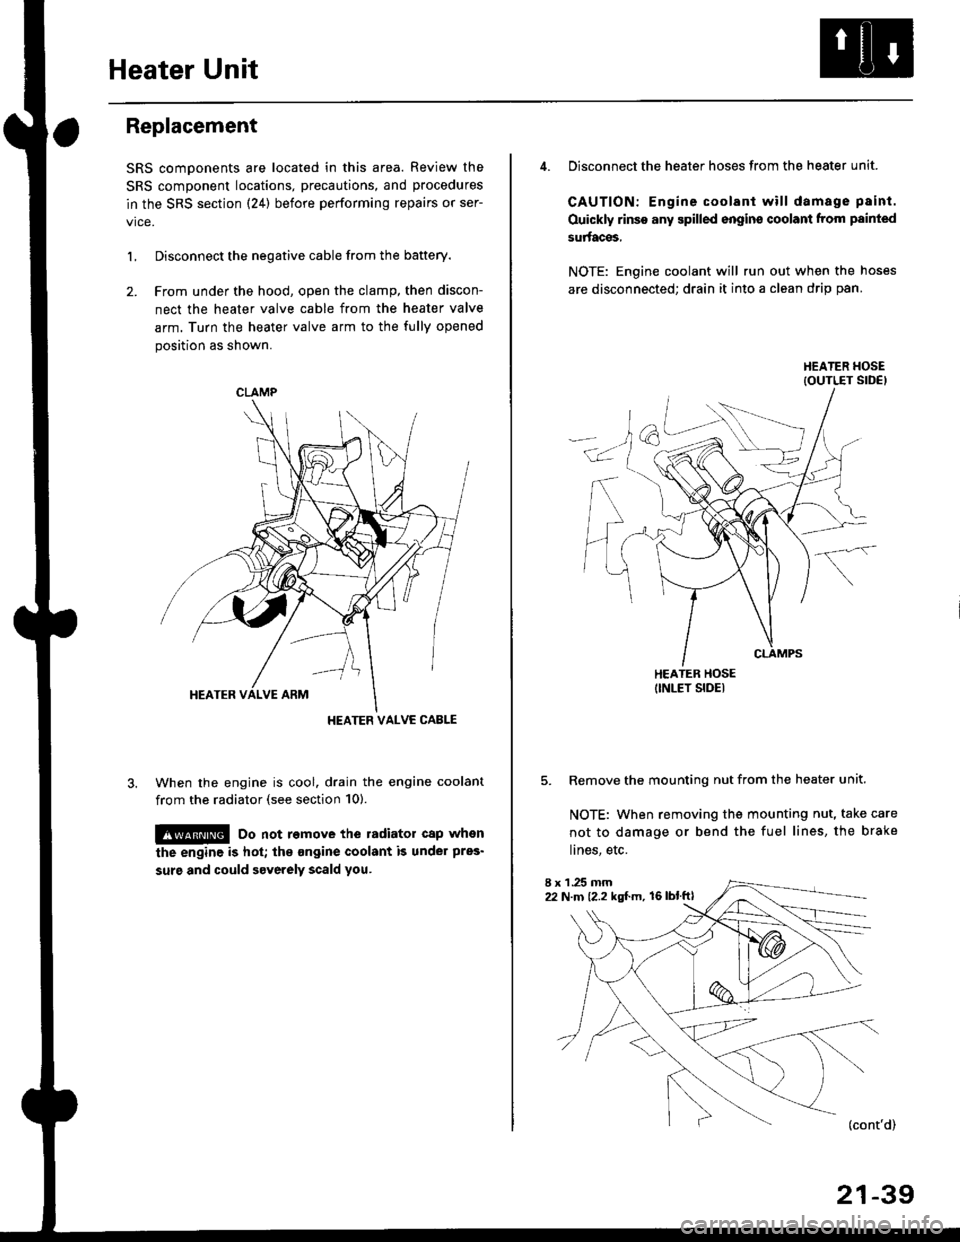 HONDA CIVIC 1999 6.G Repair Manual Heater Unit
Replacement
SRS components are located in this area. Review the
SRS component locations, precautions, and procedures
in the SRS section {24} before performing repairs or ser-
L Disconnect 